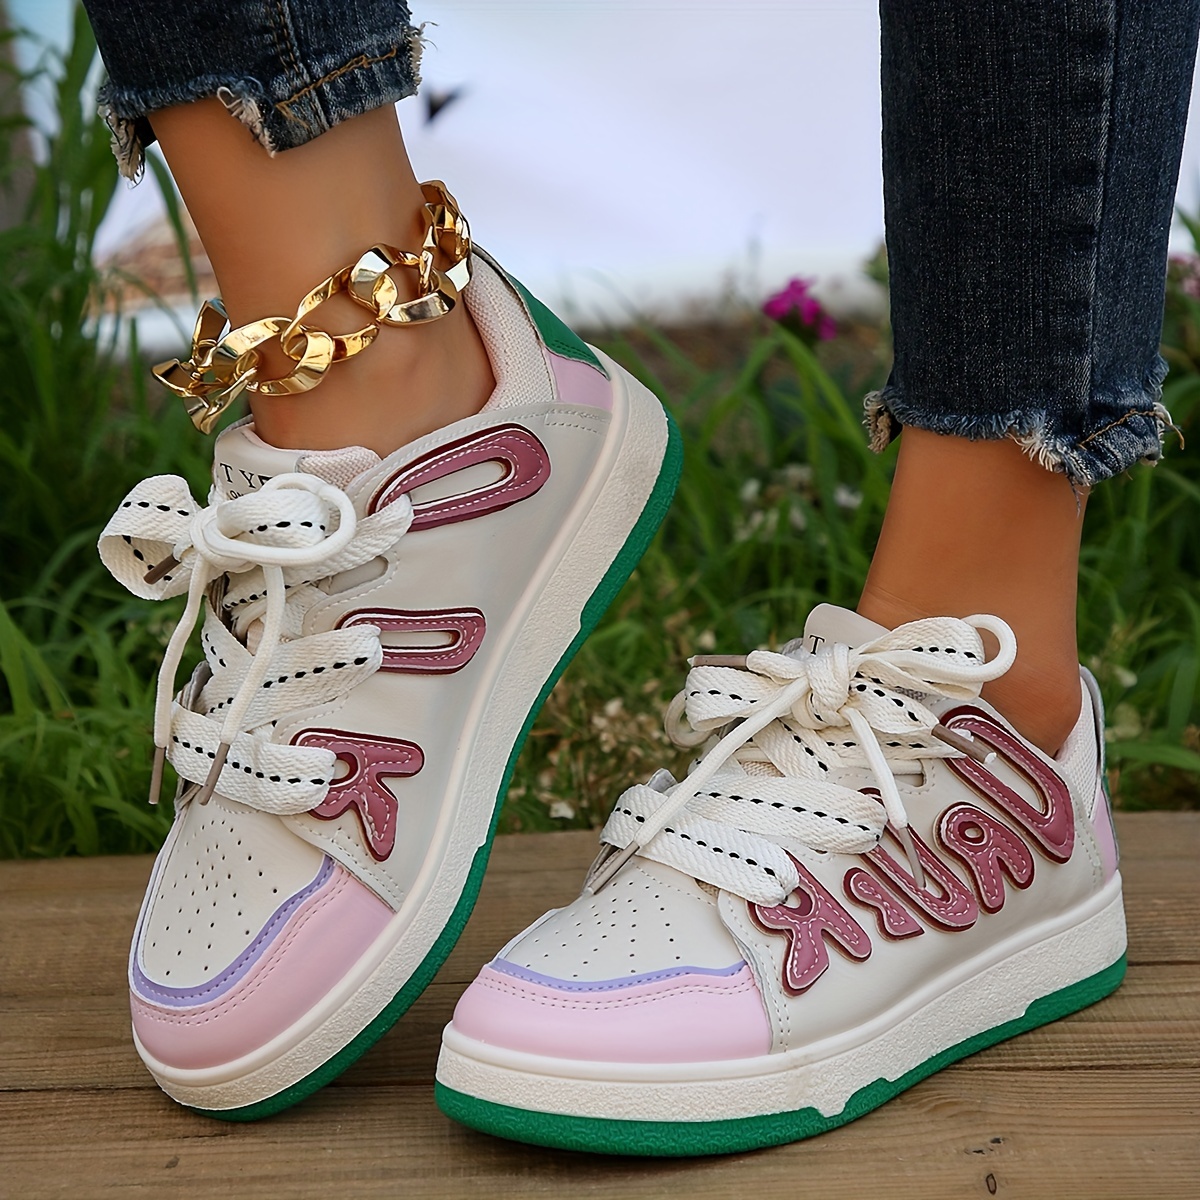 Women's Letter Decor Sneakers, Stylish Lace Up Outdoor Shoes